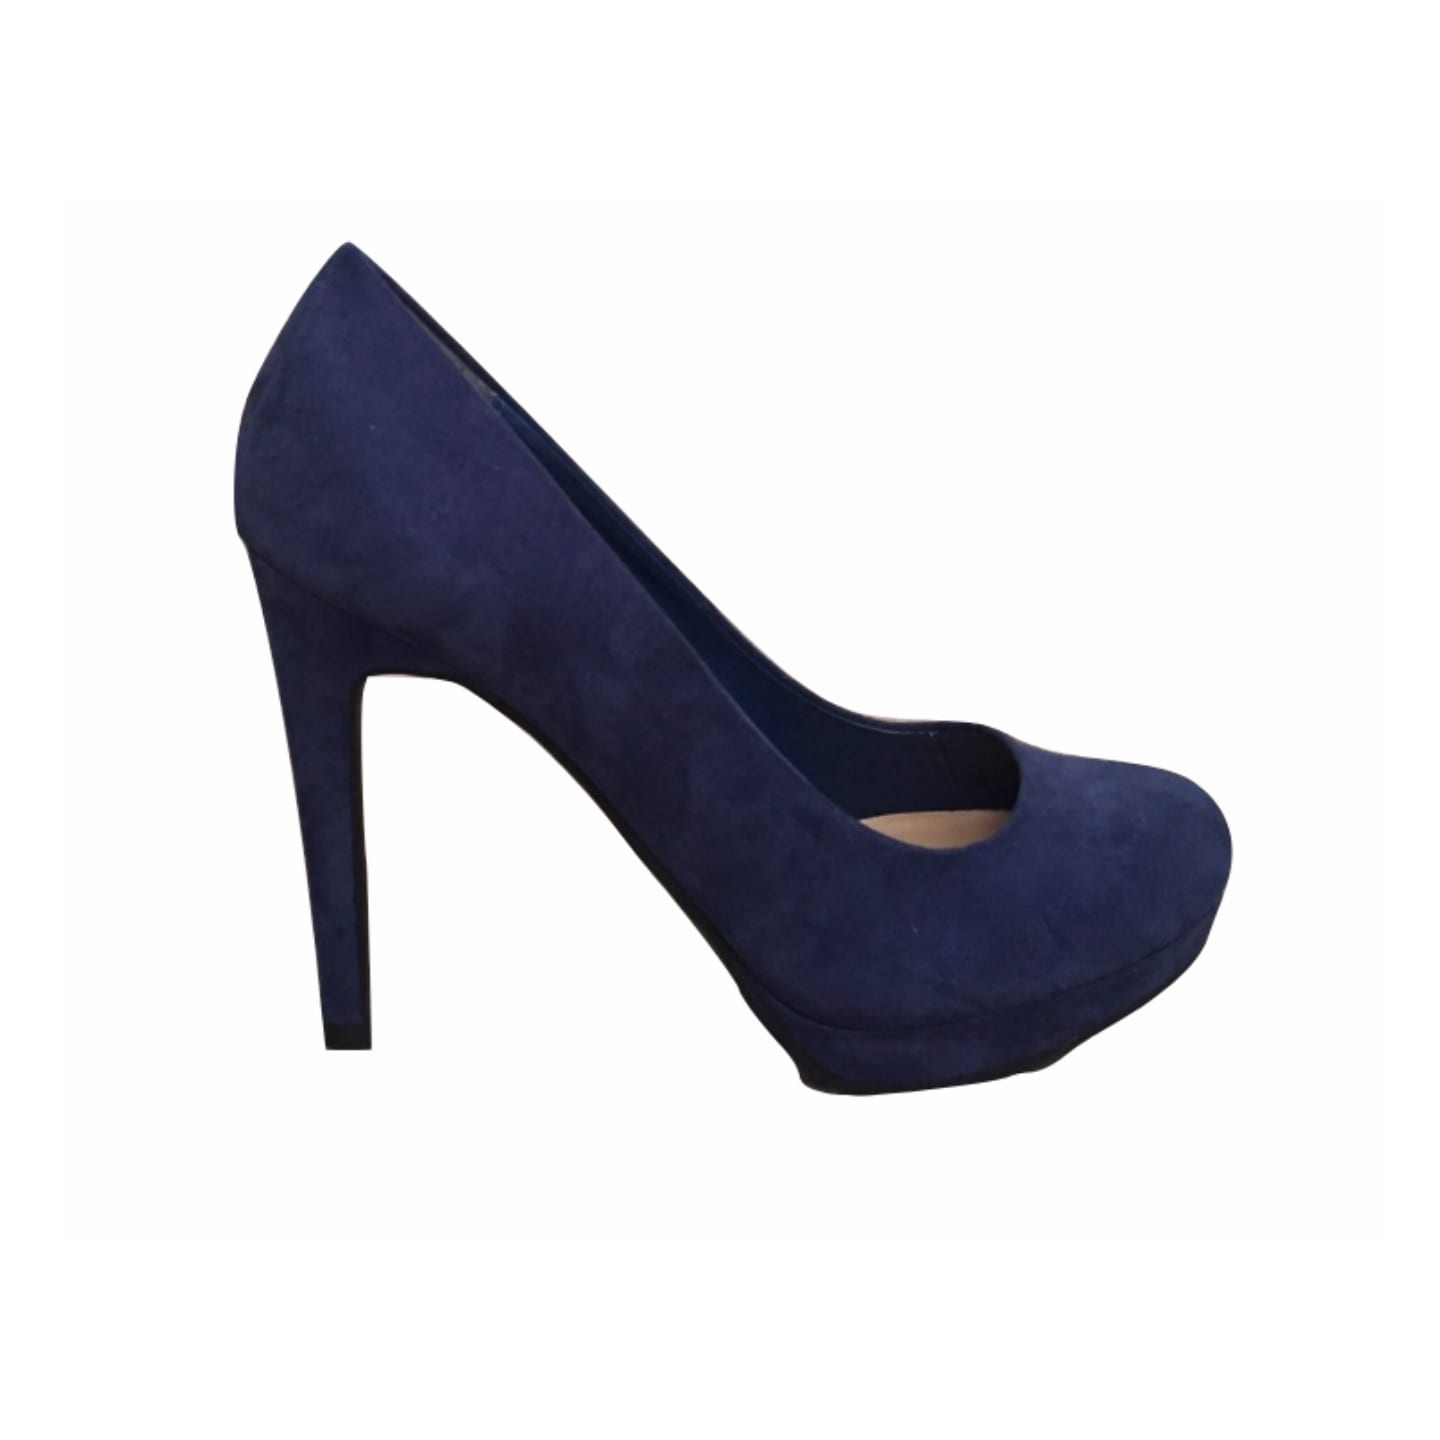 New Look Heels - Blue - Stockpoint Apparel Outlet